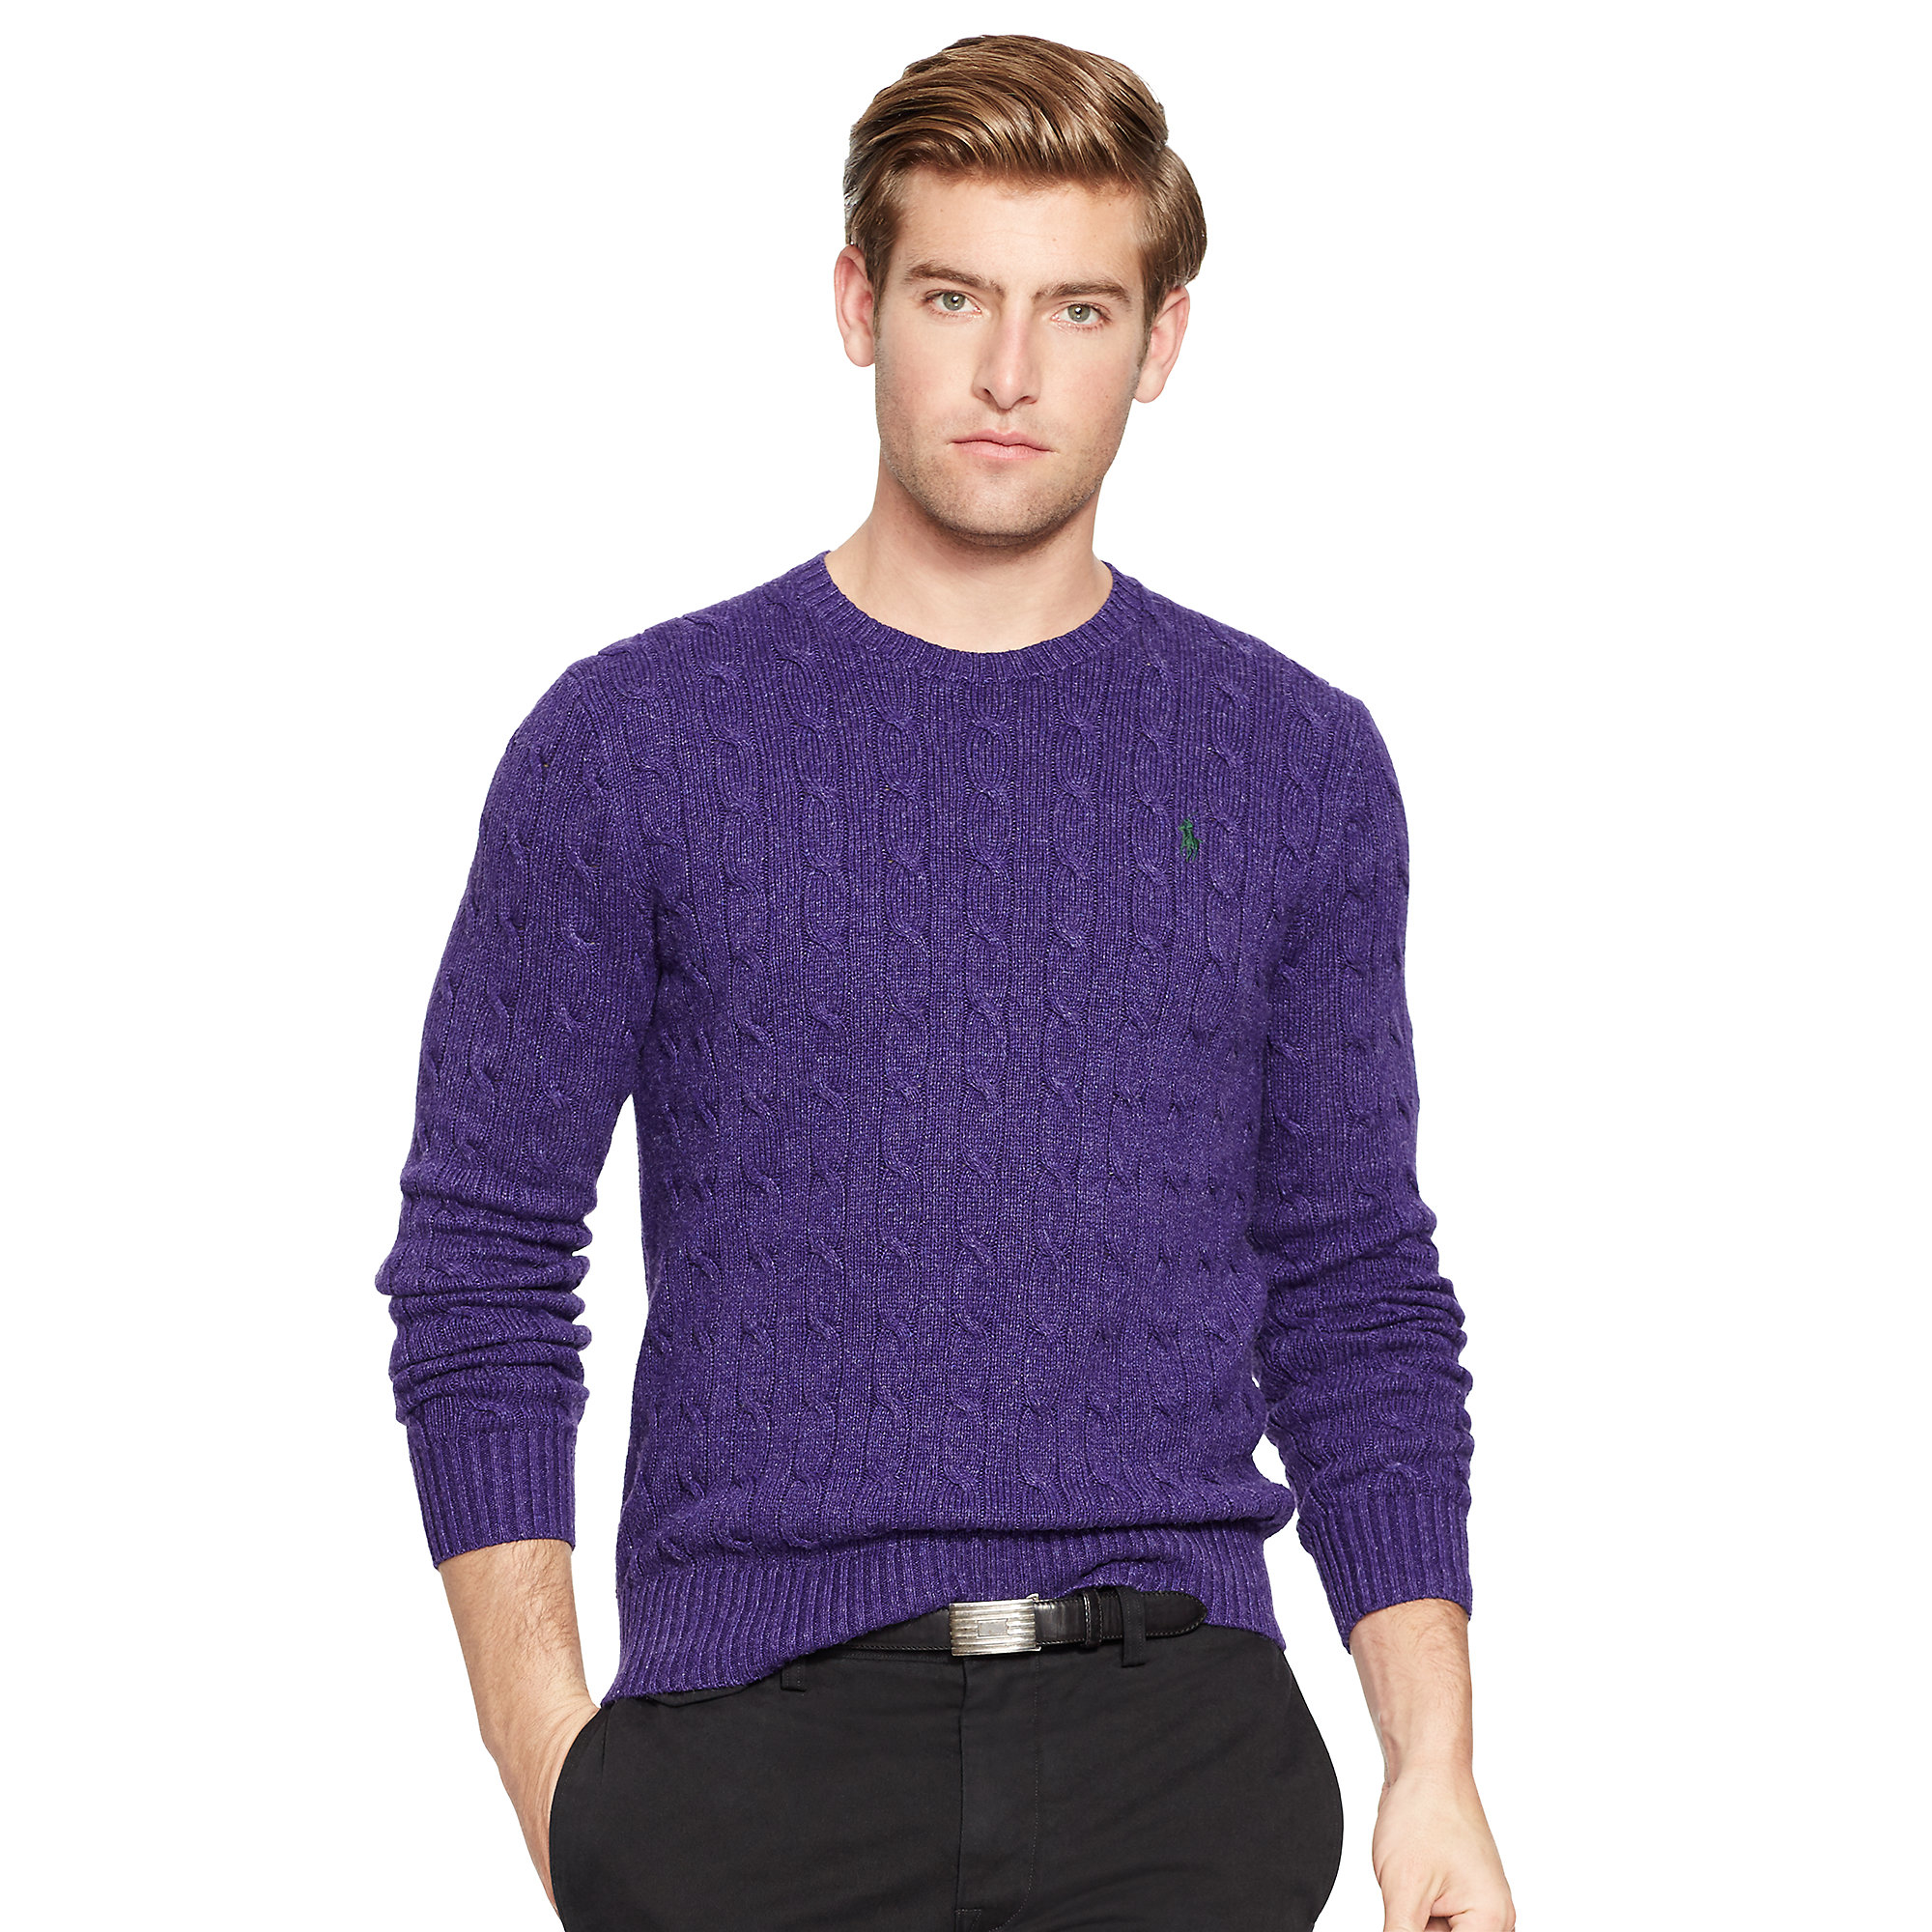 Polo Ralph Lauren Cable-knit Tussah Silk Sweater in Purple for Men - Lyst